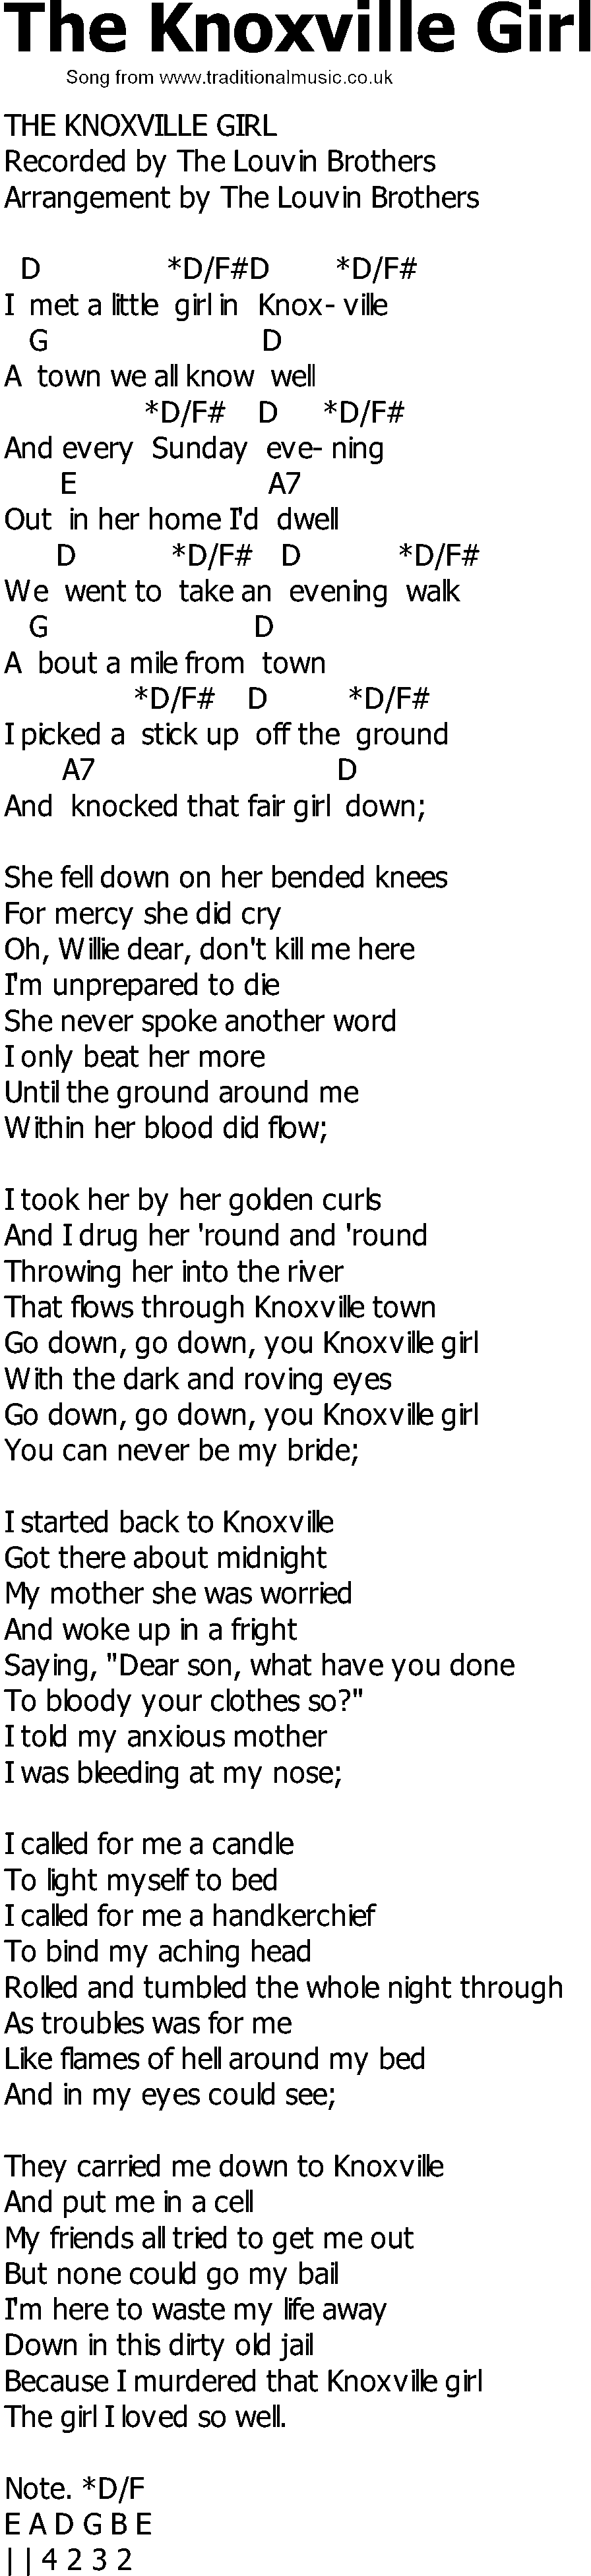 Old Country song lyrics with chords - The Knoxville Girl